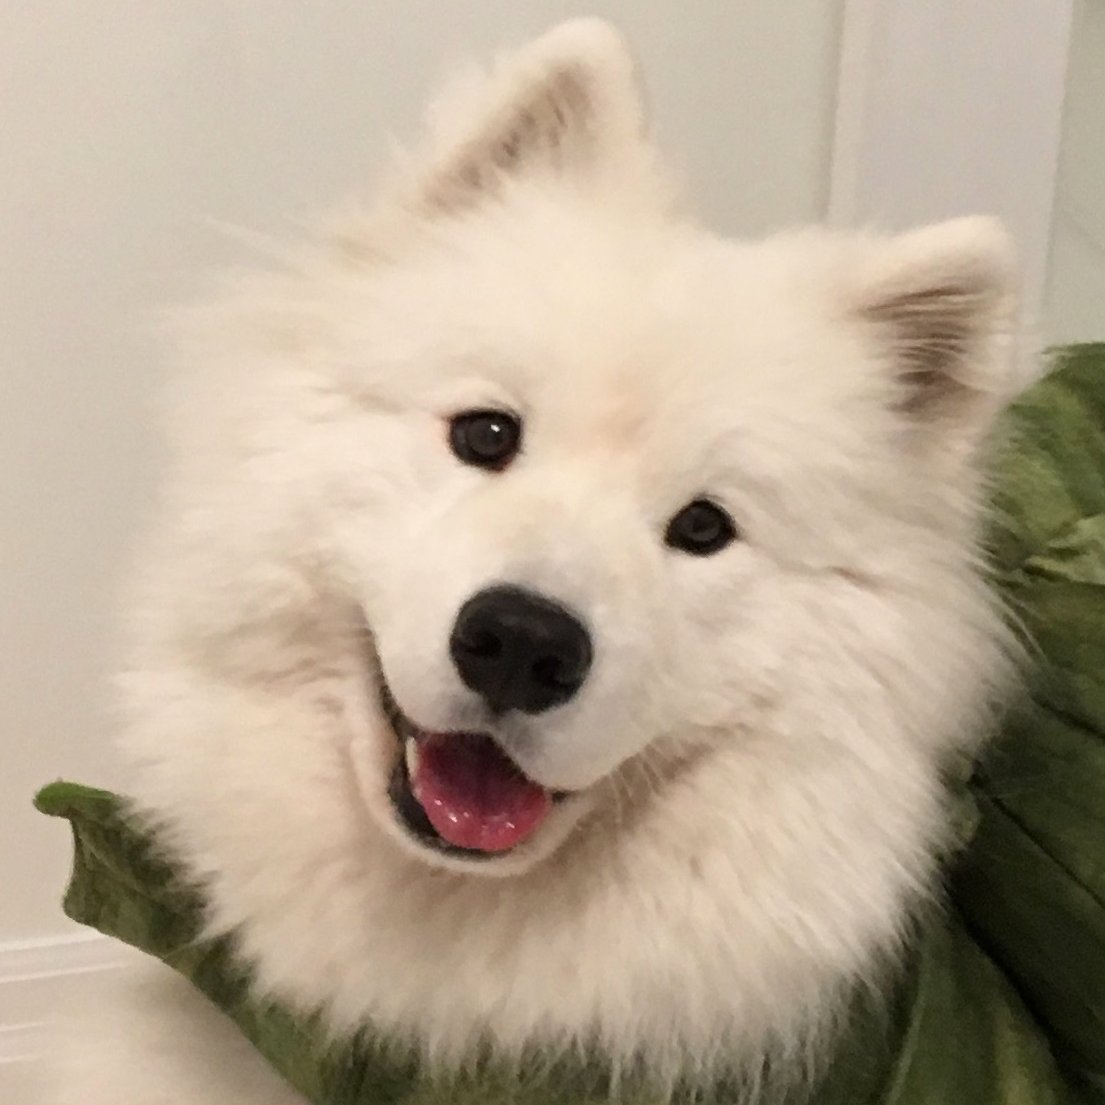 Proud brother to my amazing dog Alvin #Samoyed | Fascinated by the crossover between #medicine & #technology | Likes/Tweets ≠ Endorsement | #MedTwitter